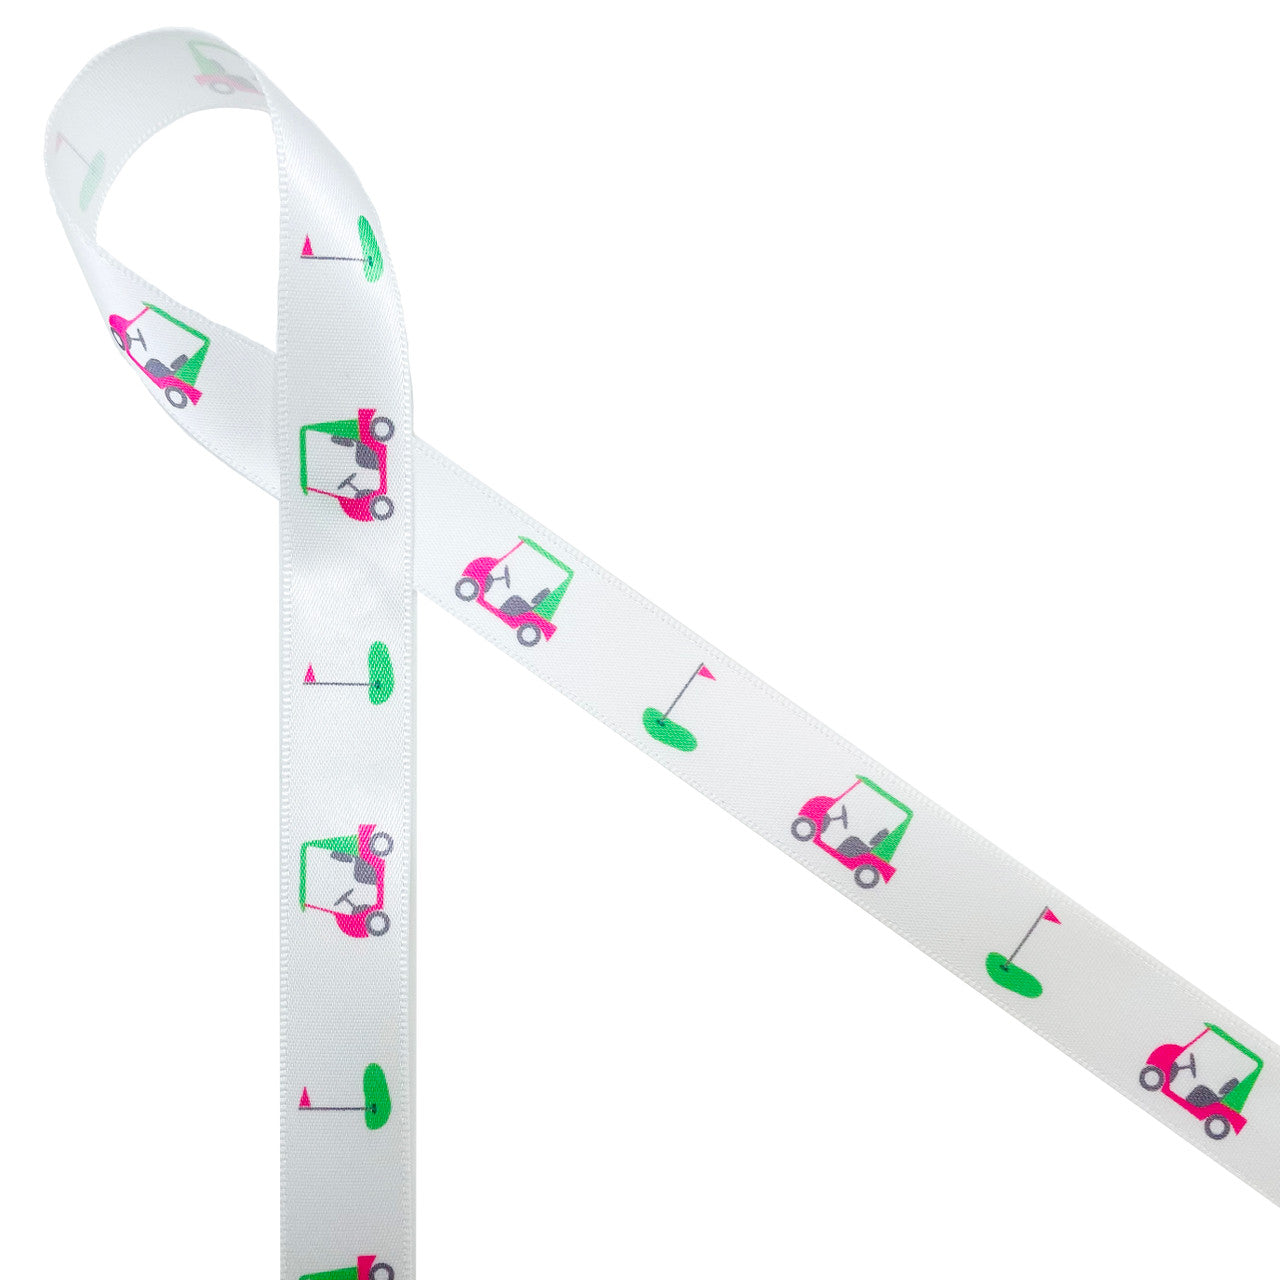 Golf carts in pink and green with greens flag printed on 5/8" white single face satin ribbon is ideal for all ladies golfing events. This is fun ribbon for gift wrap, awards banquets, tournaments and Mother's Day. Make sure you have this fun ribbon on hand for the lady golfer in your life! All our ribbon is designed an printed in the USA